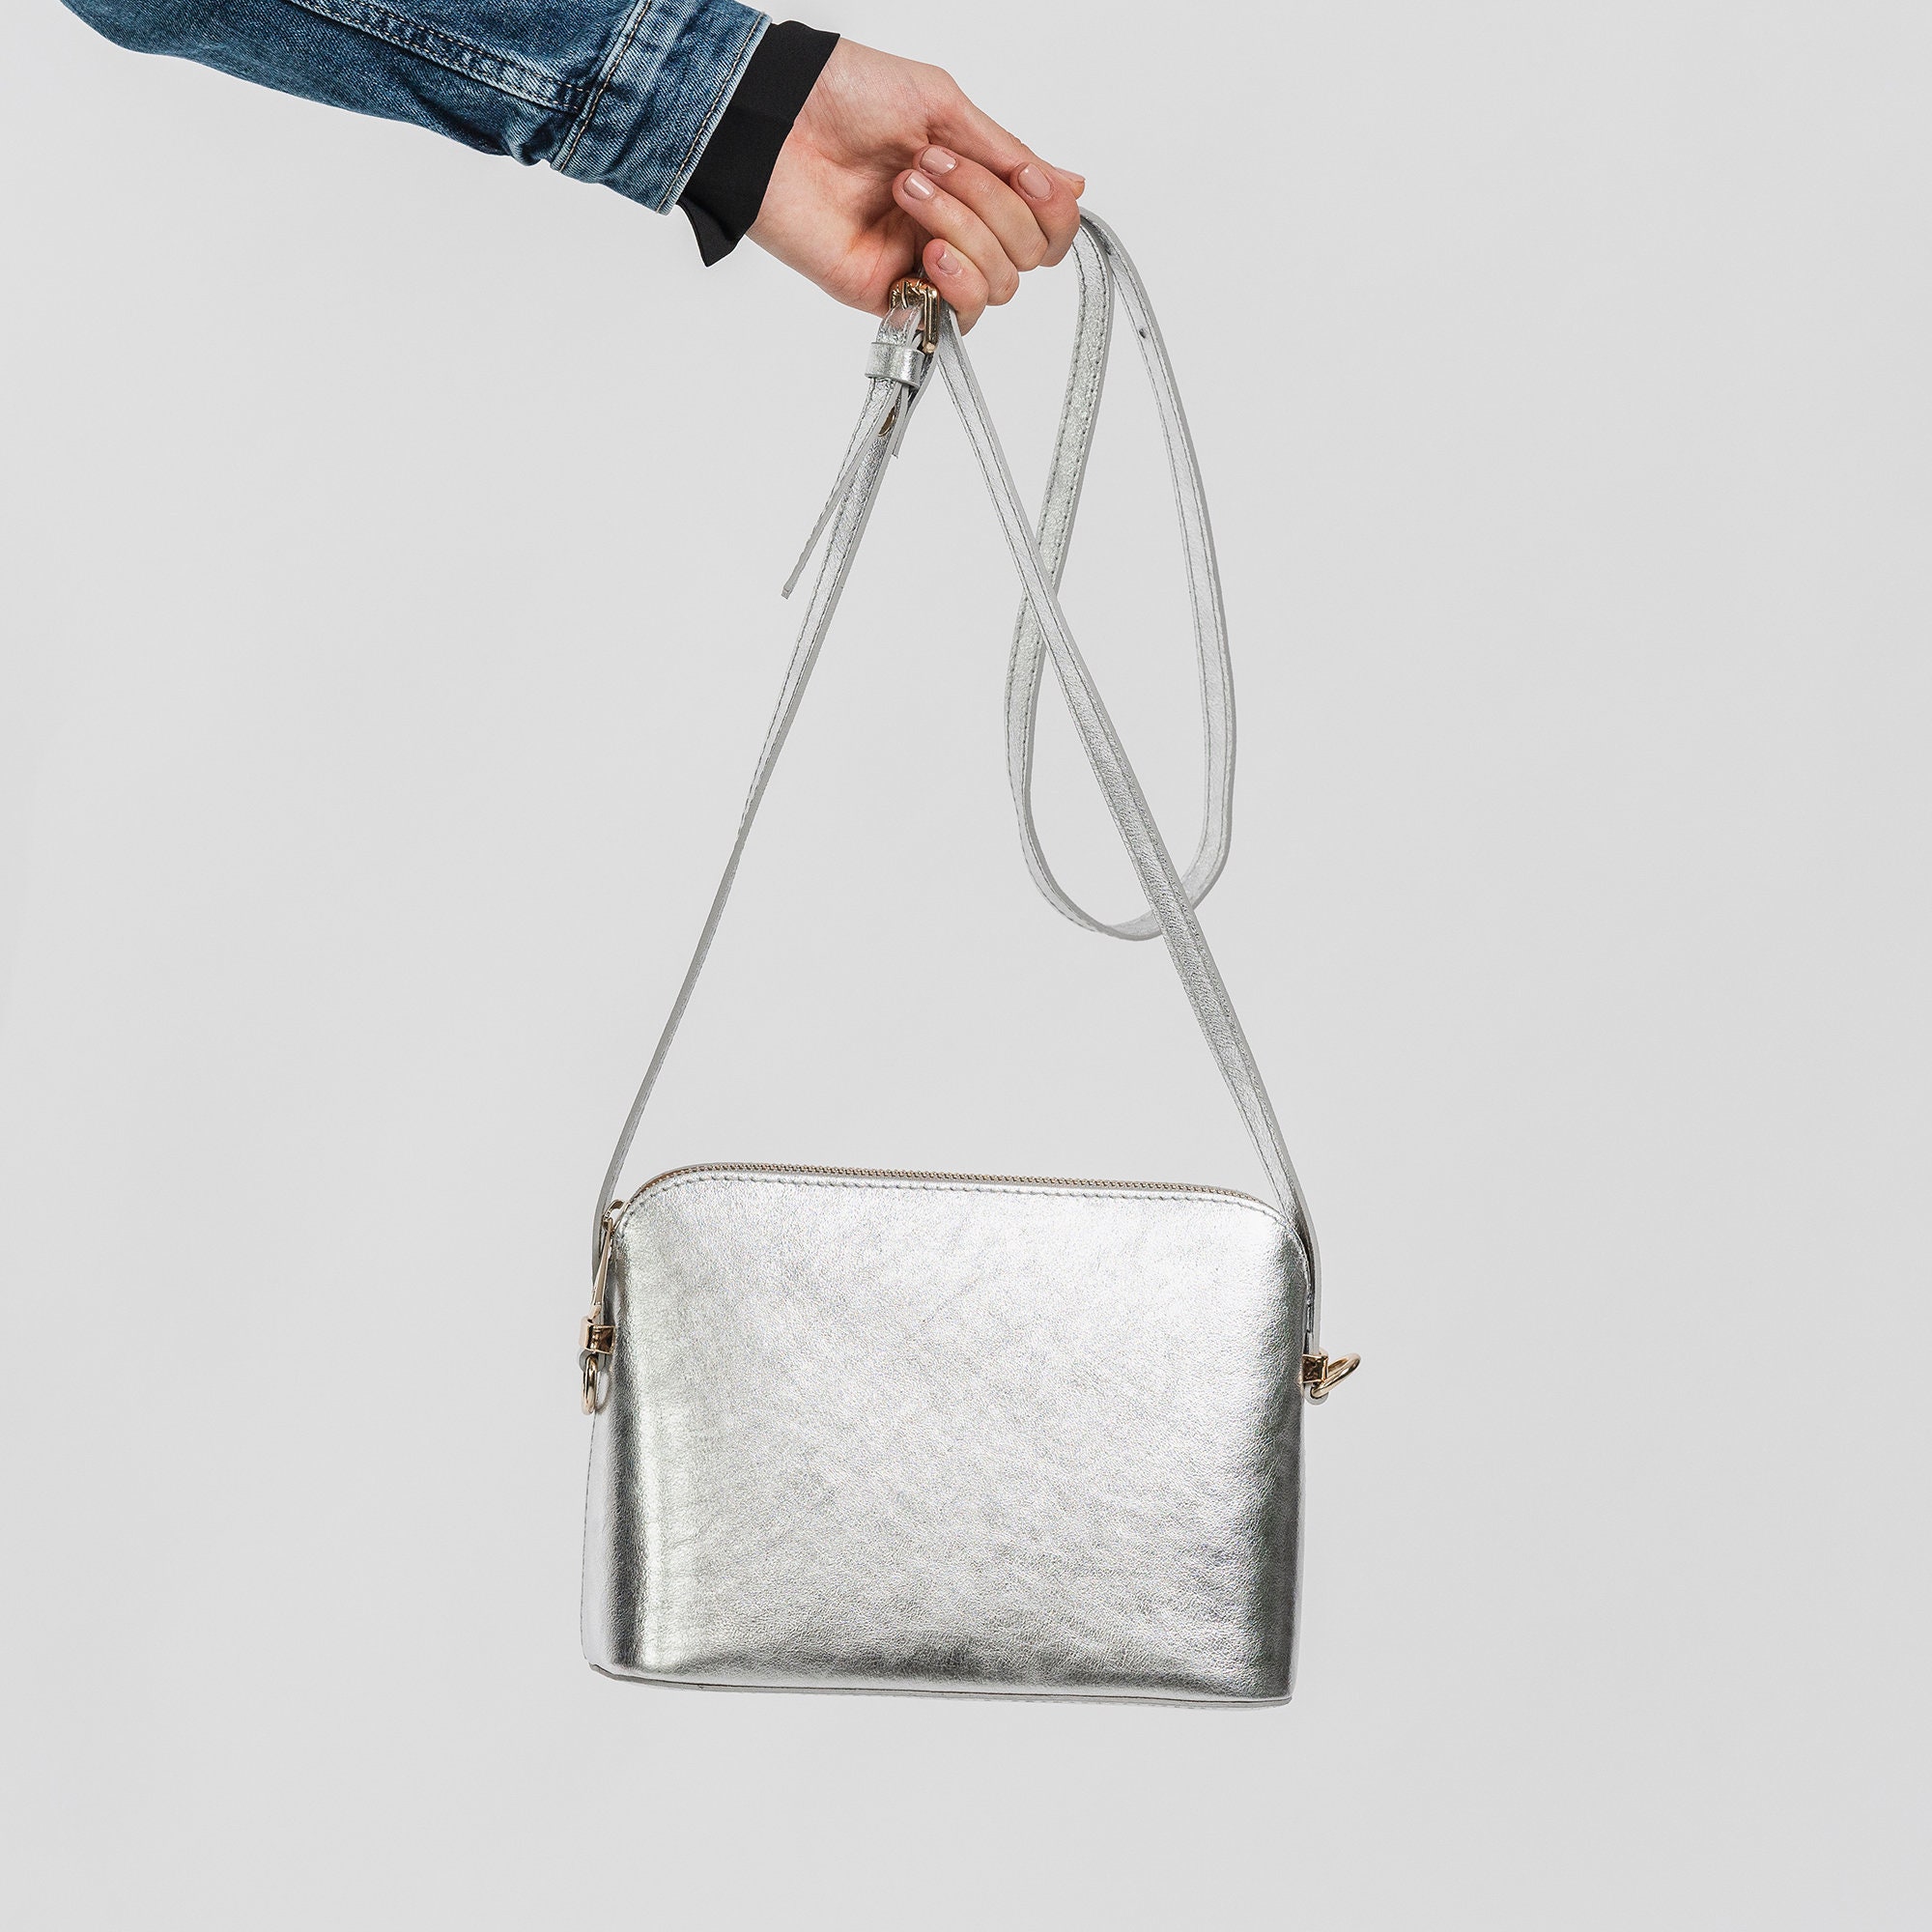 White Silver Crossbody Bag, Soft Metallic Silver and White Leather